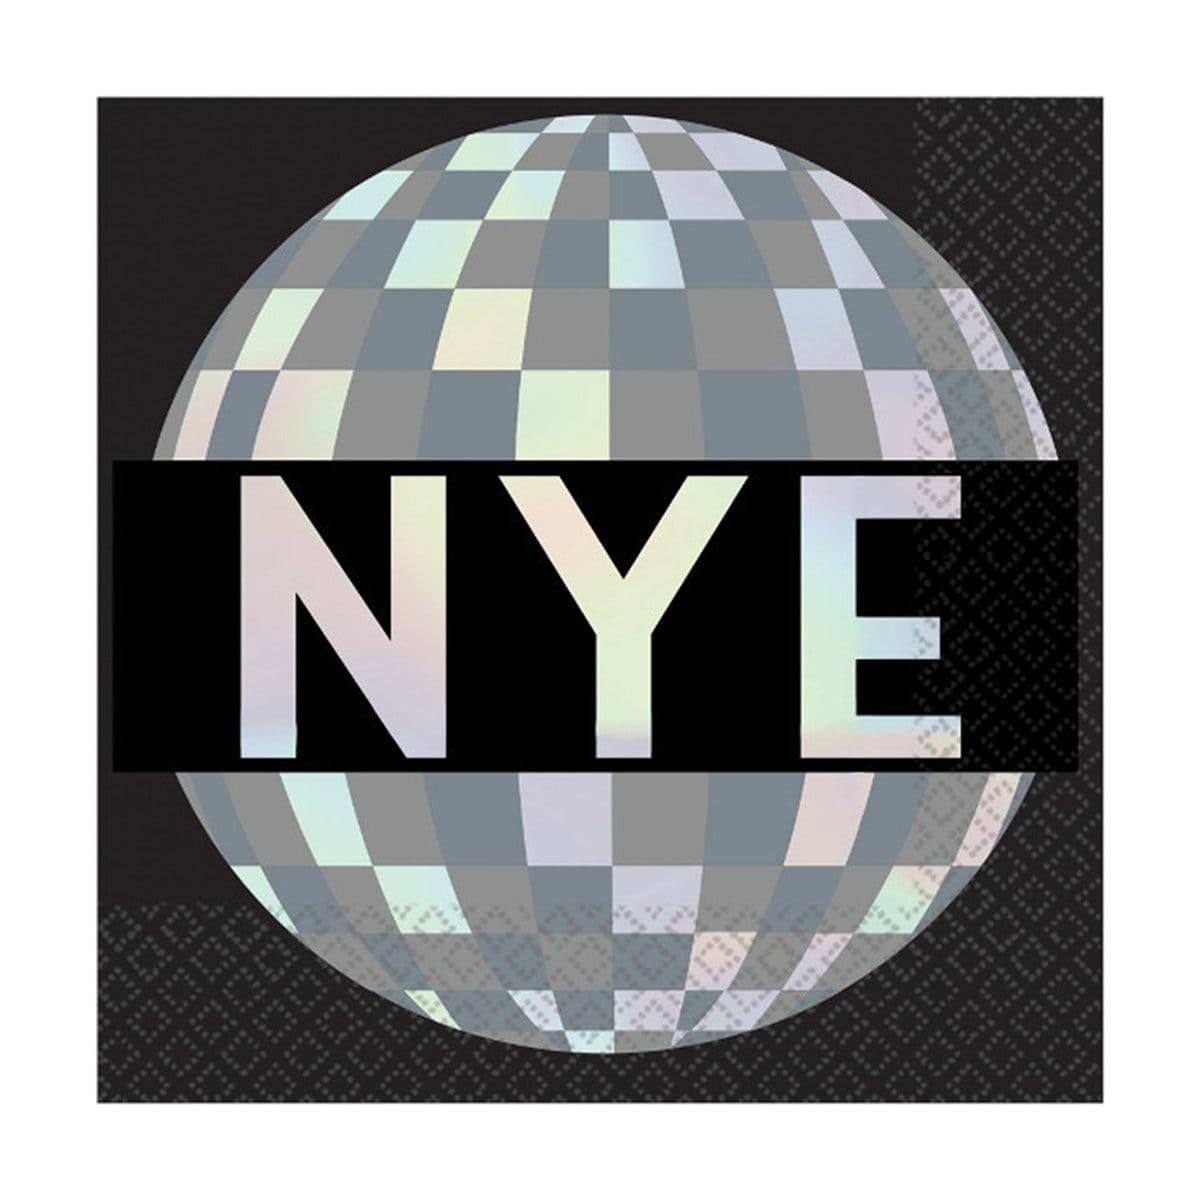 Buy New Year Disco Ball - Beverage Napkins 16/pkg sold at Party Expert